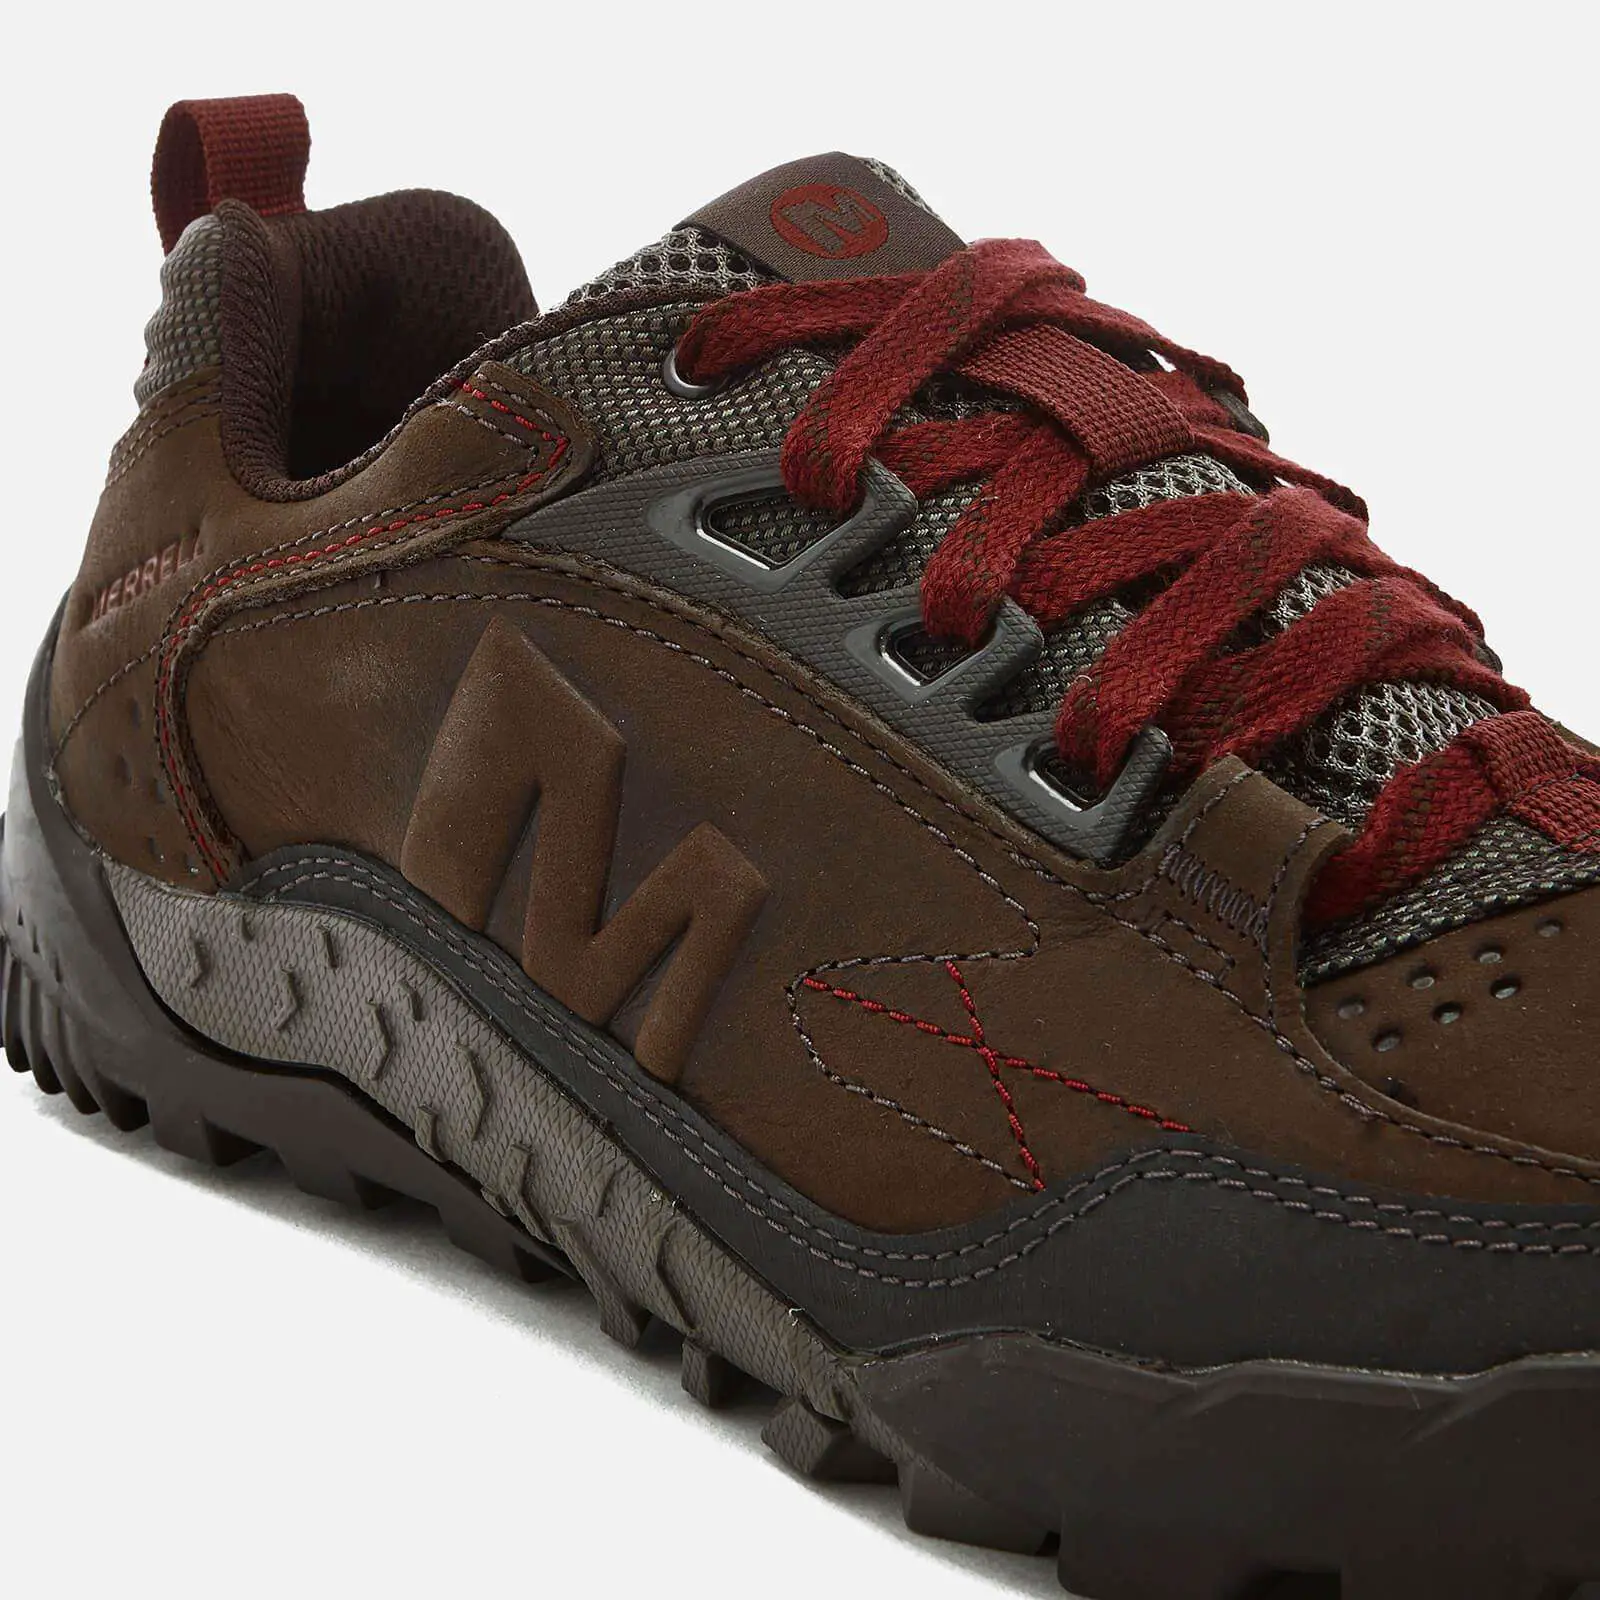 Merrell Annex Hiking Shoes in Brown for Men